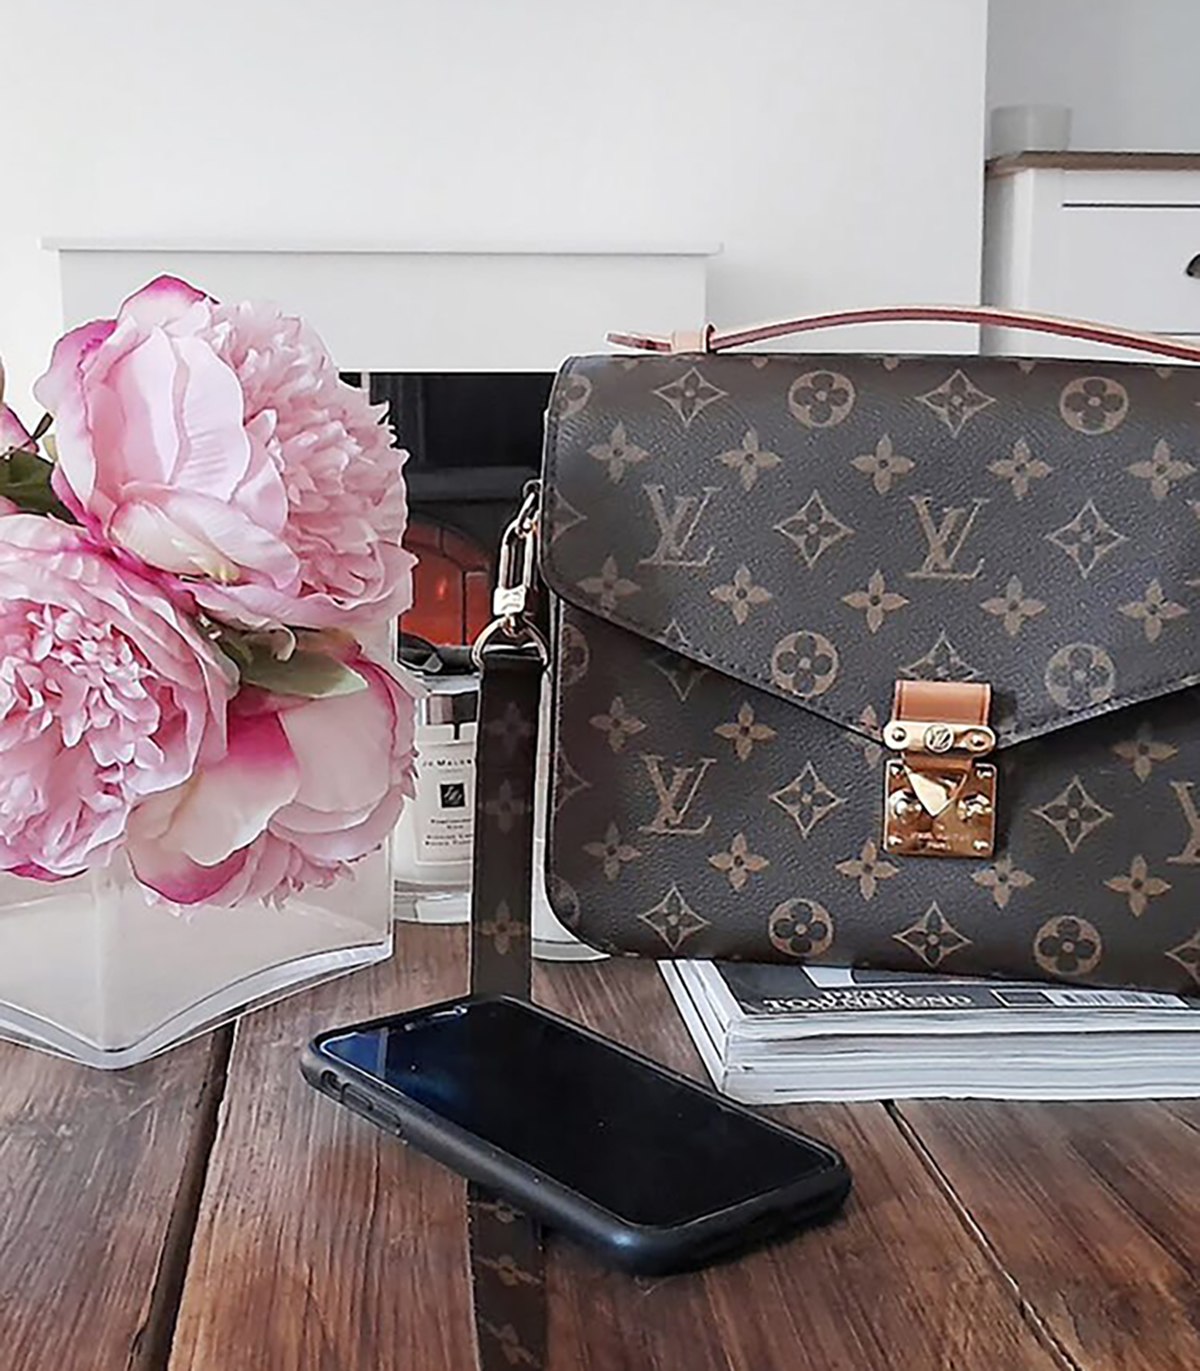 louis vuitton speedy with patches - Carrie Bradshaw Lied